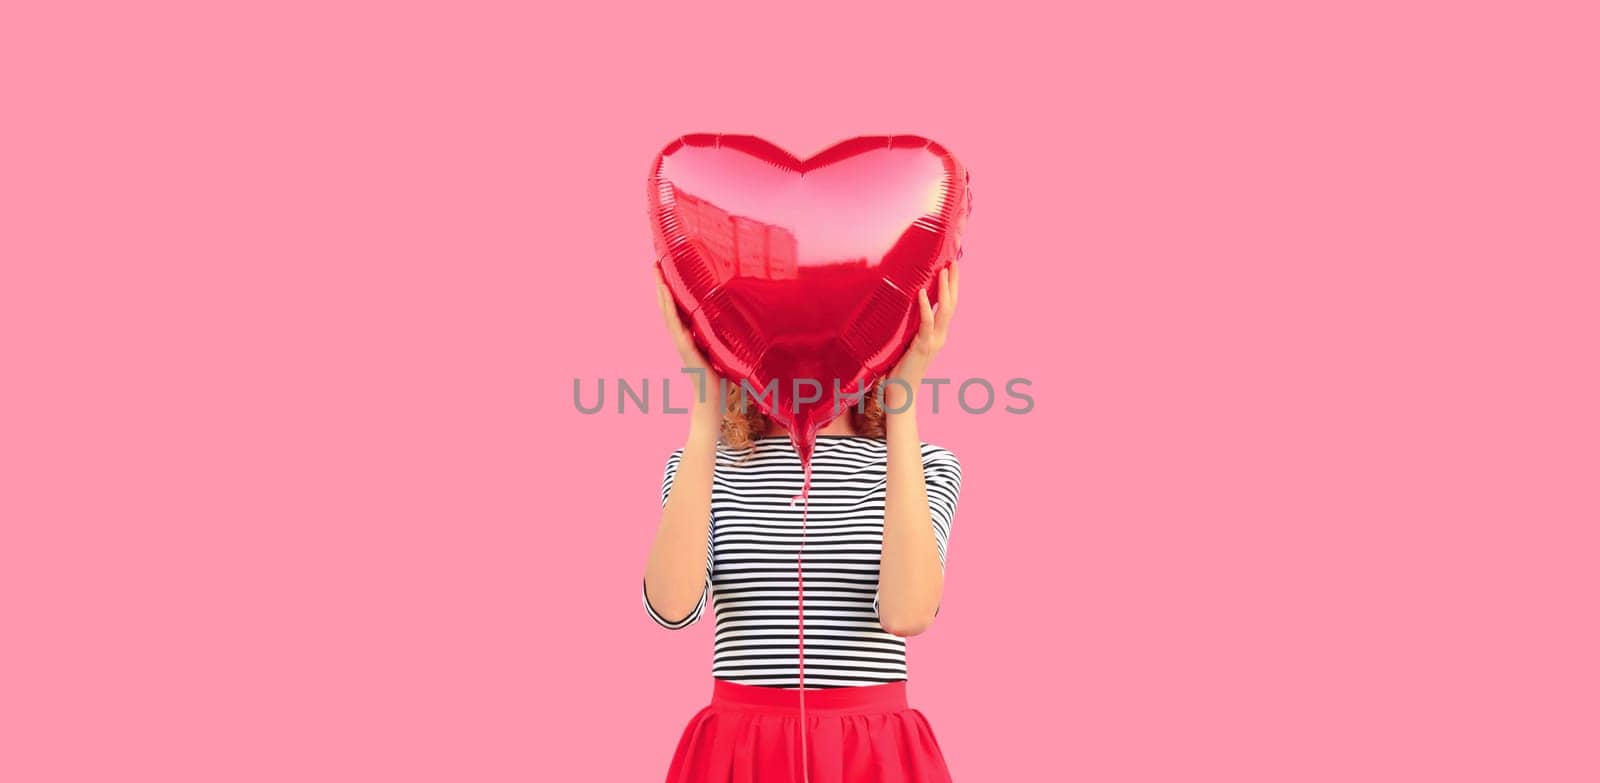 Cute portrait of happy sweet woman covering head with red heart shaped balloon by Rohappy